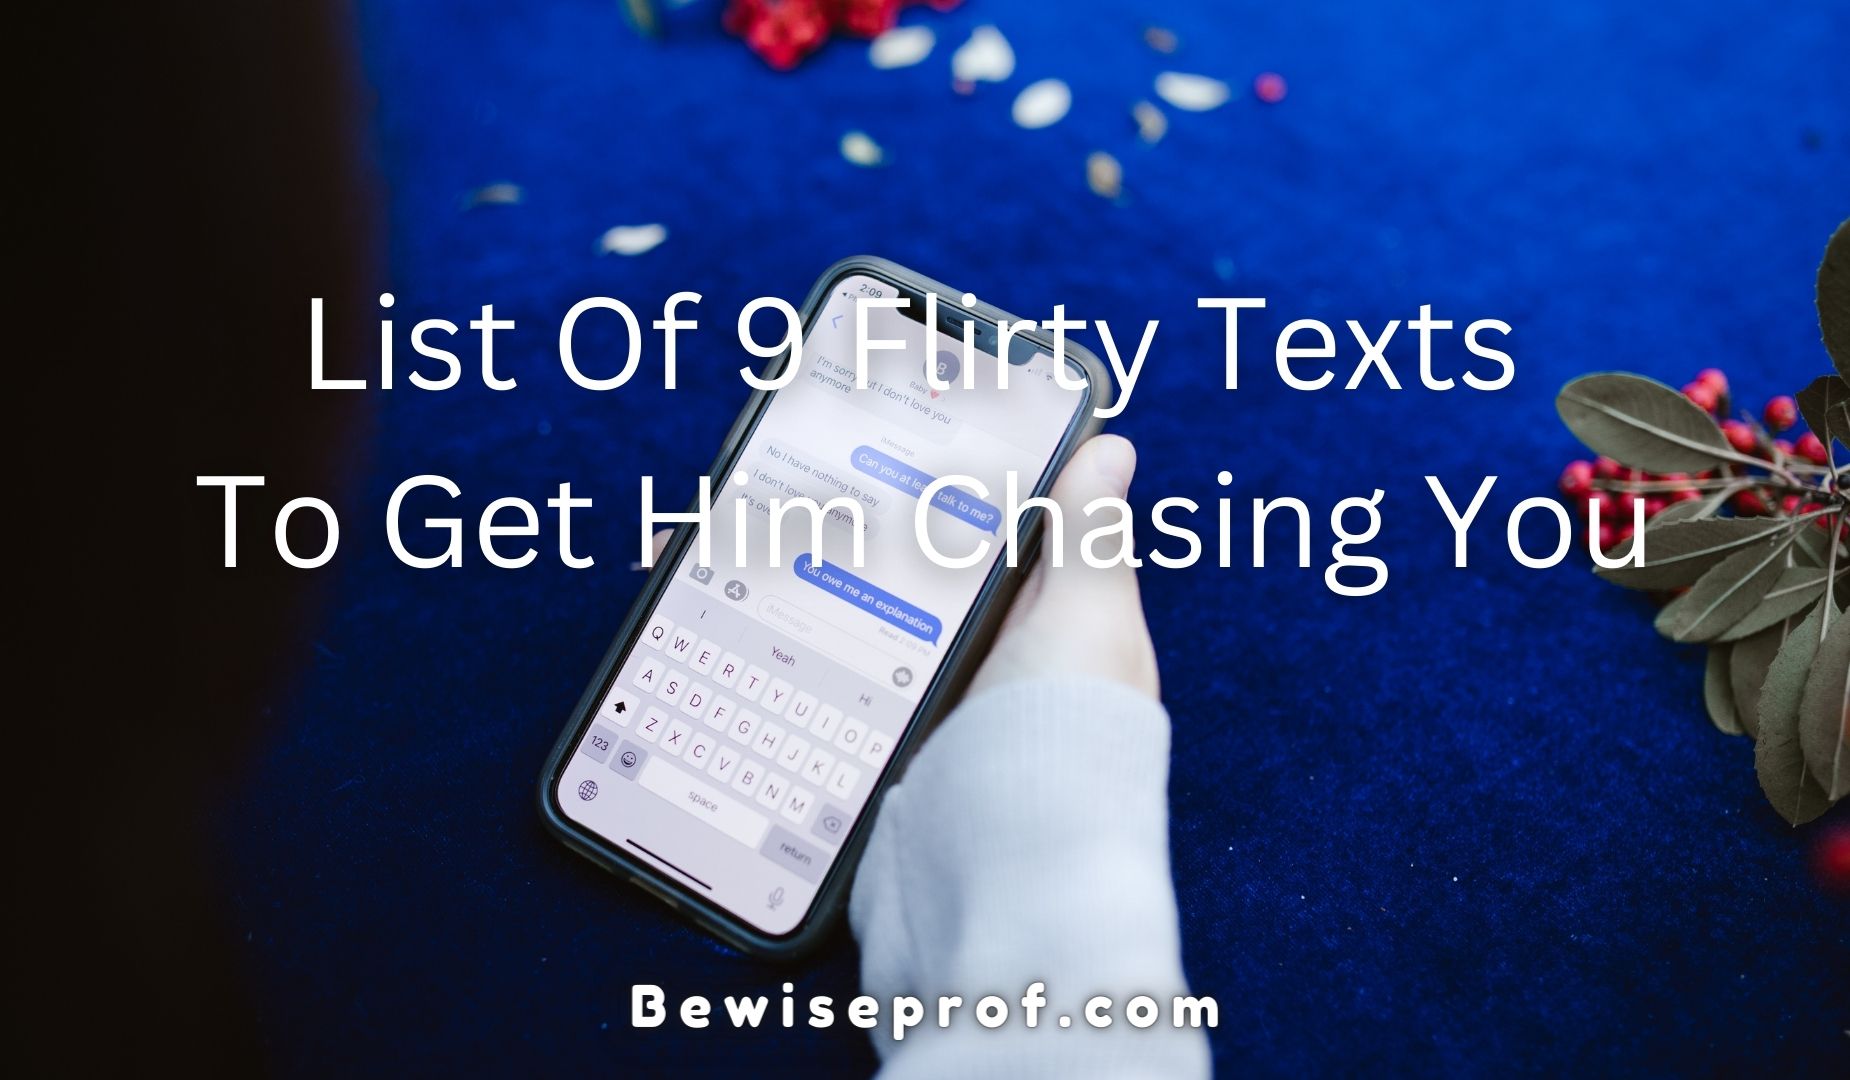 List Of 9 Flirty Texts To Get Him Chasing You